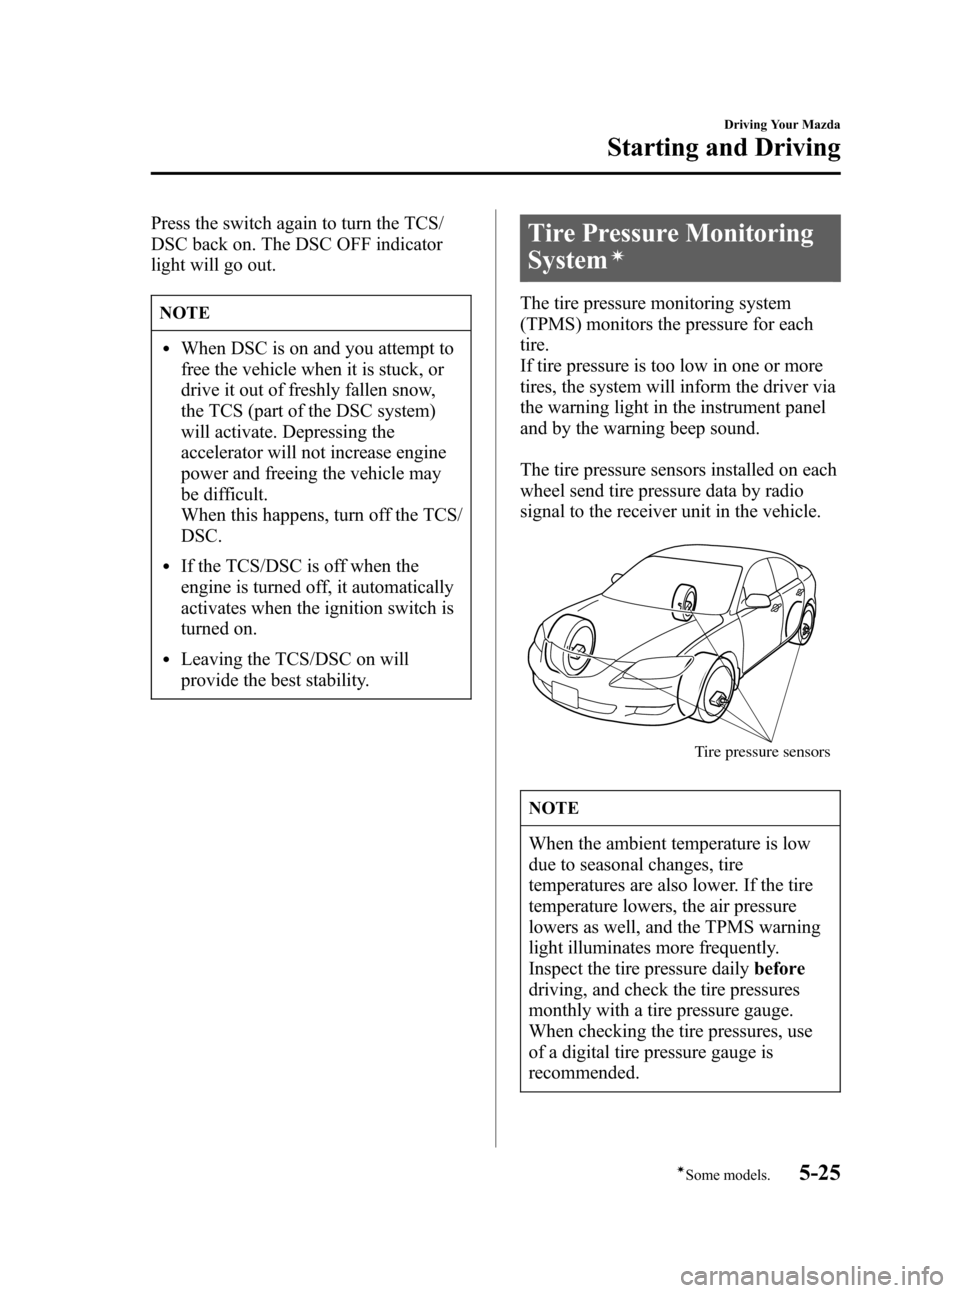 MAZDA MODEL 3 HATCHBACK 2007  Owners Manual (in English) Black plate (147,1)
Press the switch again to turn the TCS/
DSC back on. The DSC OFF indicator
light will go out.
NOTE
lWhen DSC is on and you attempt to
free the vehicle when it is stuck, or
drive it